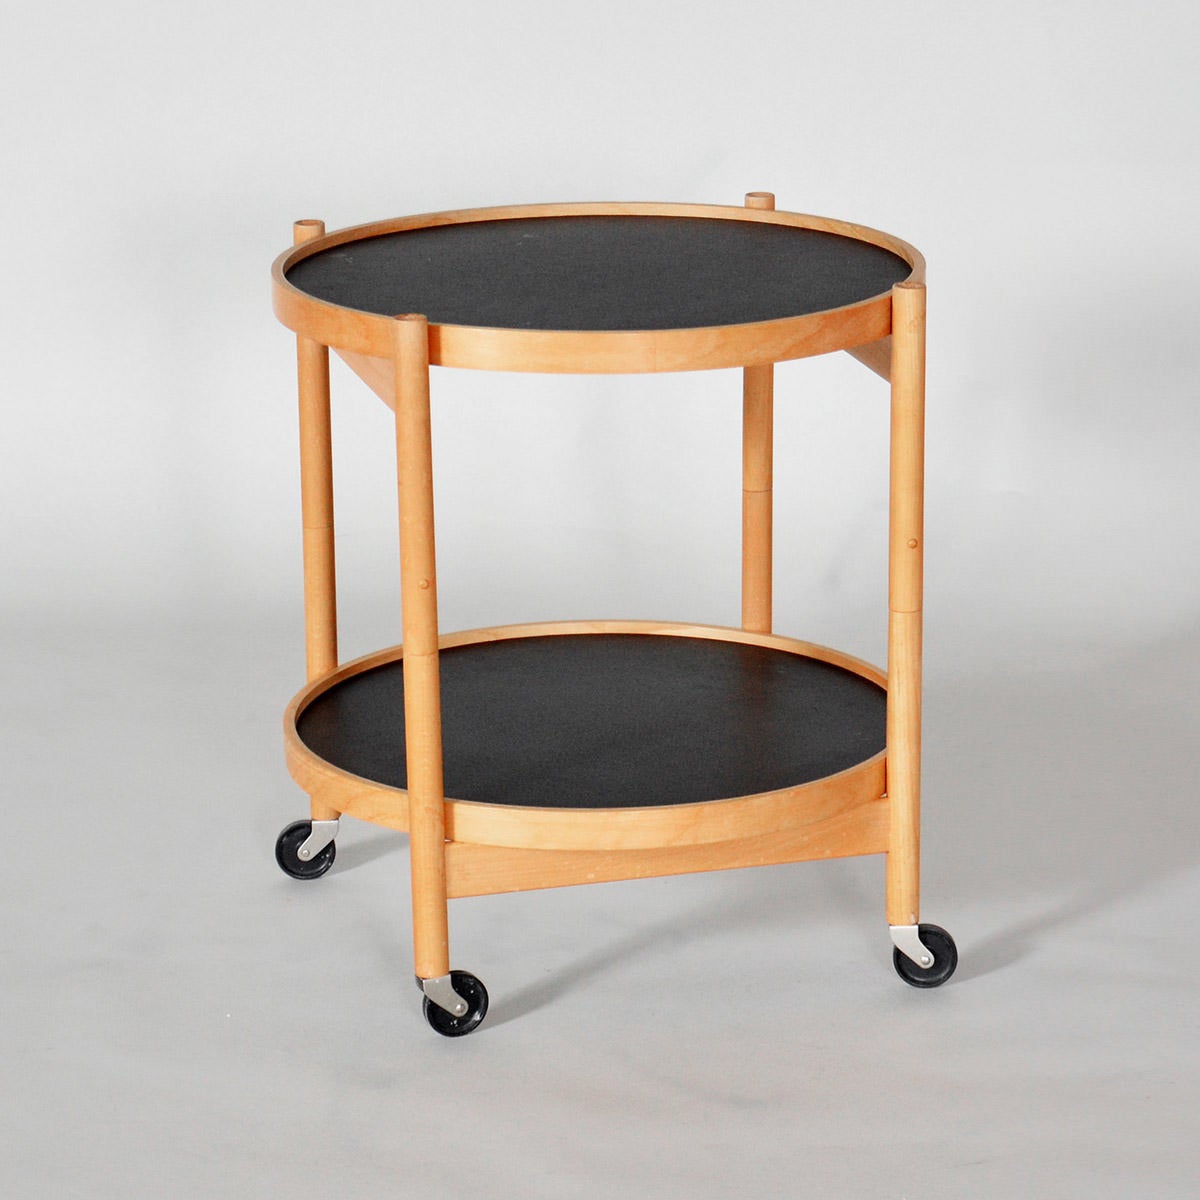 Tray table in beech wood. Foldable frame with two loose turnable plates in black/white laminate.

We ship this item world wide, please write to contact@apetersen.dk for shipping options and prices.